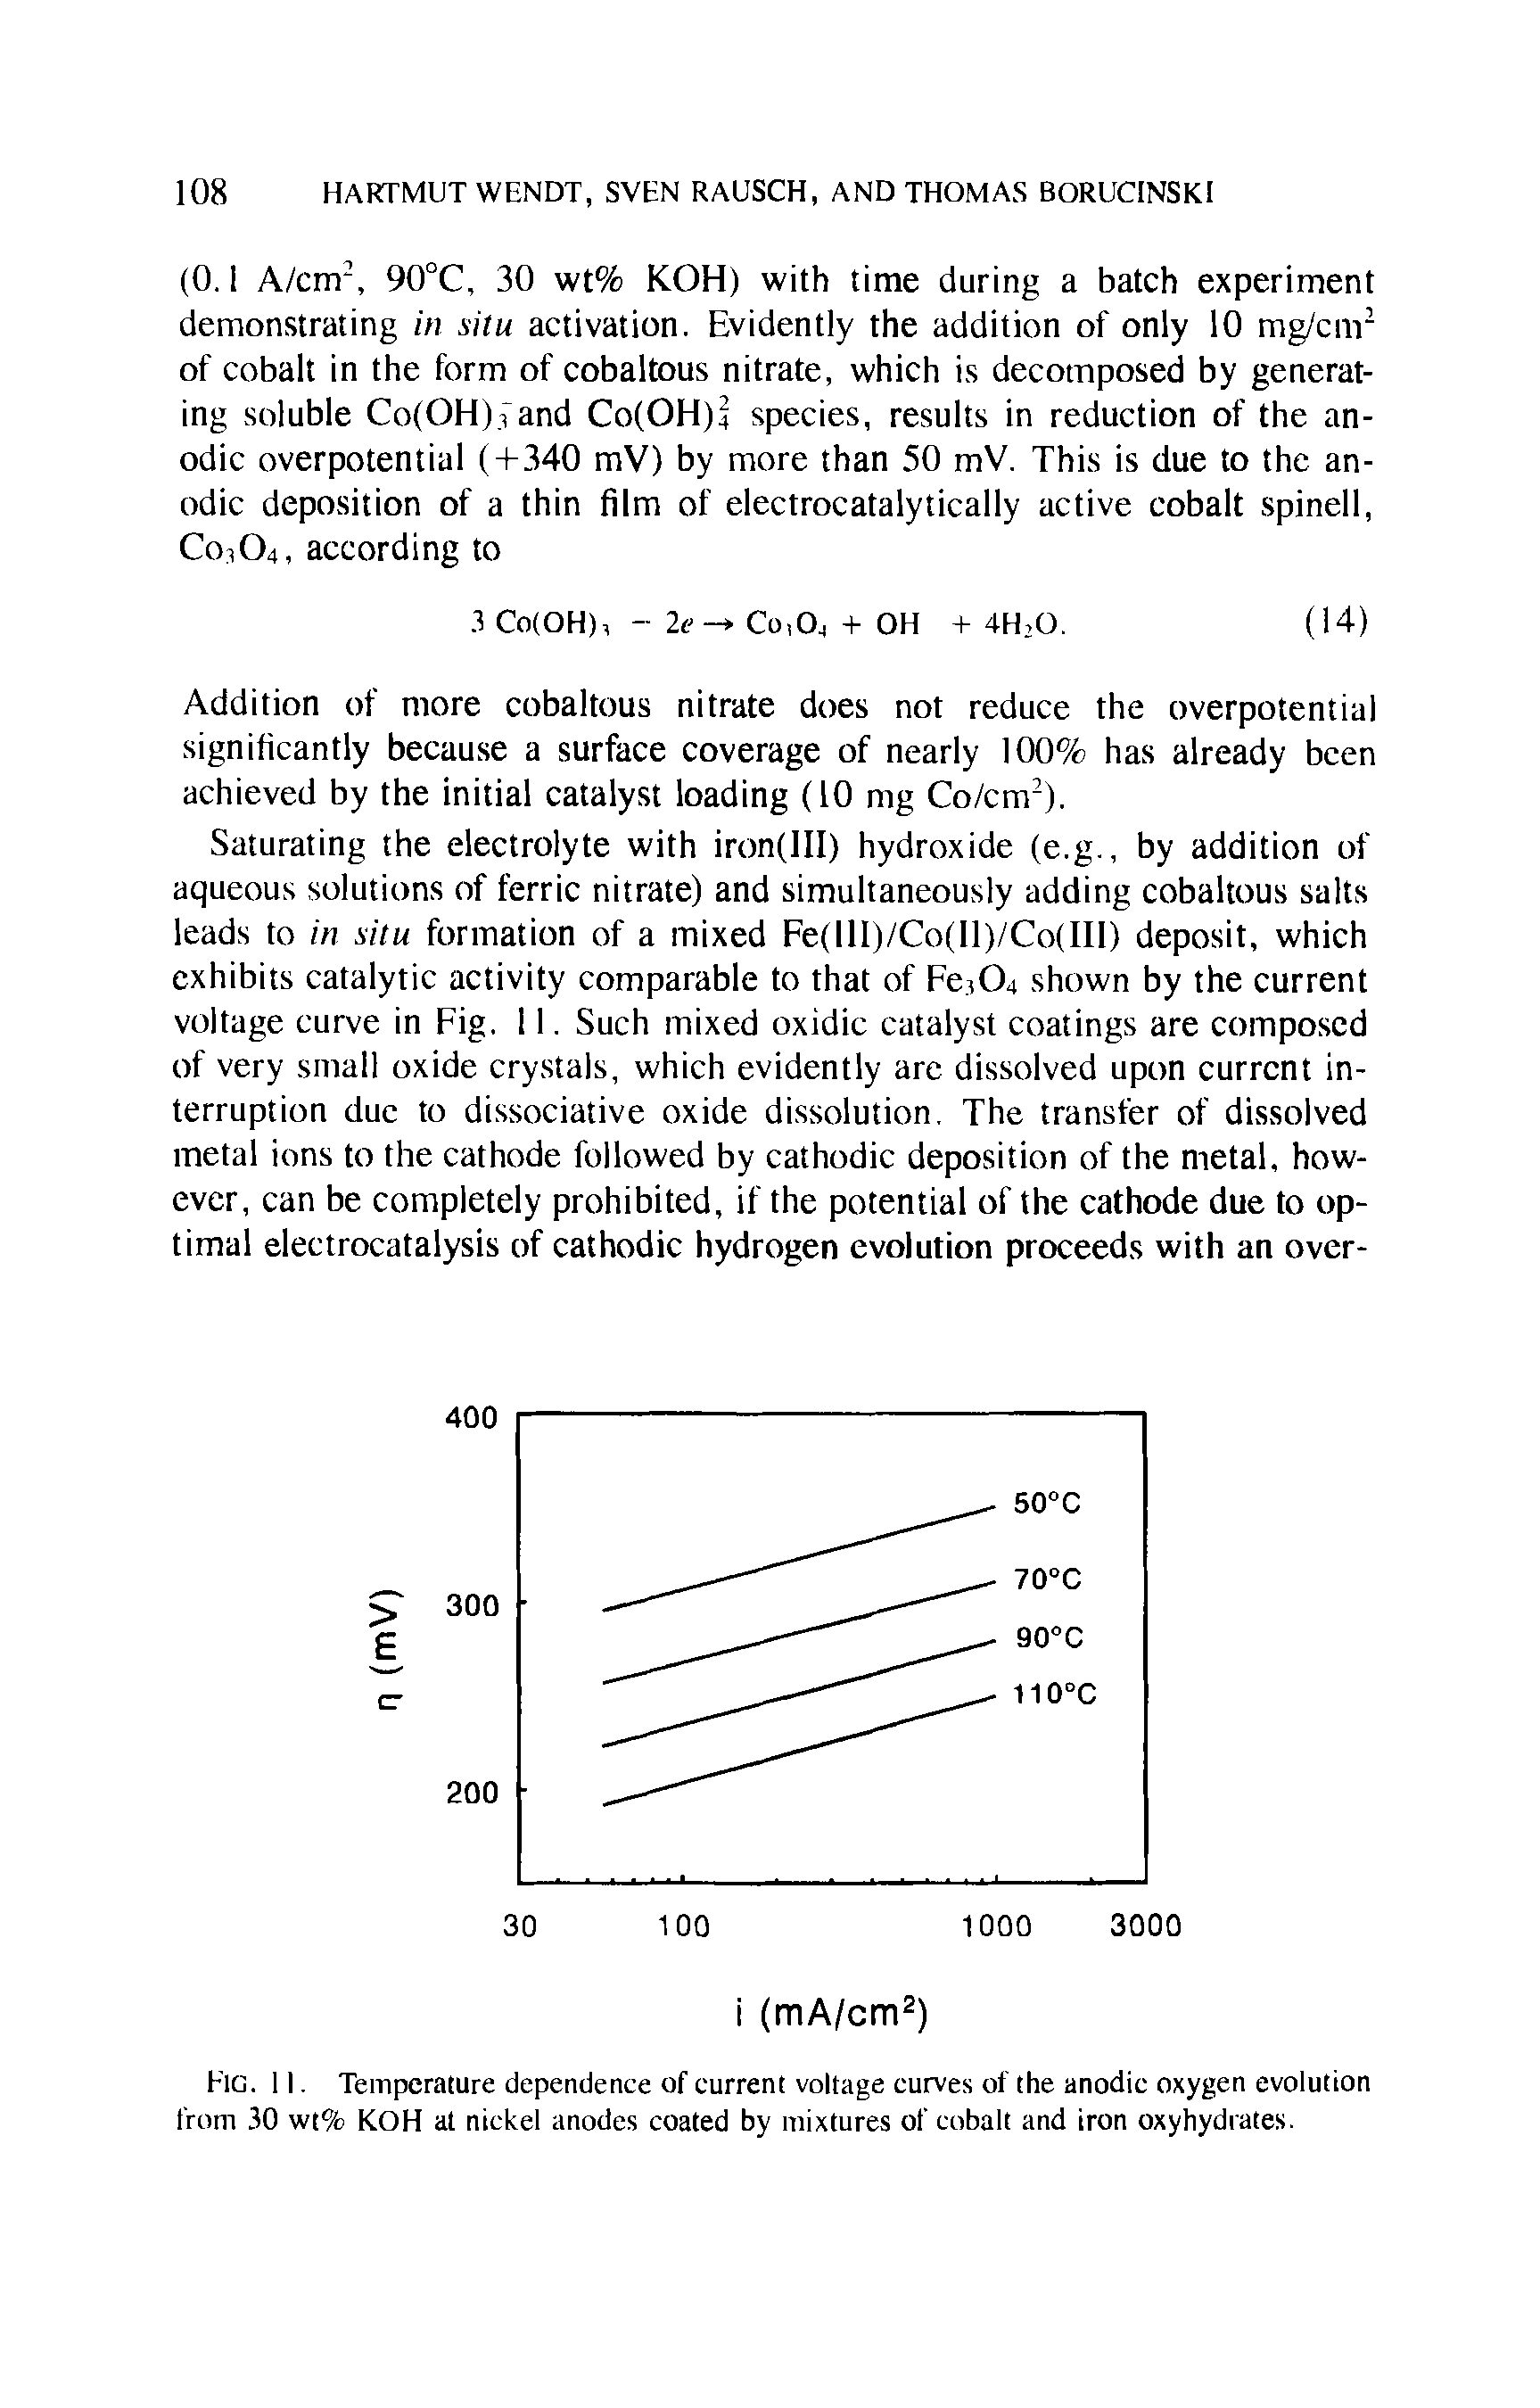 Fig. 11. Temperature dependence of current voltage curves of the anodic oxygen evolution from 30 wt% KOH at nickel anodes coated by mixtures of cobalt and iron oxyhydrates.